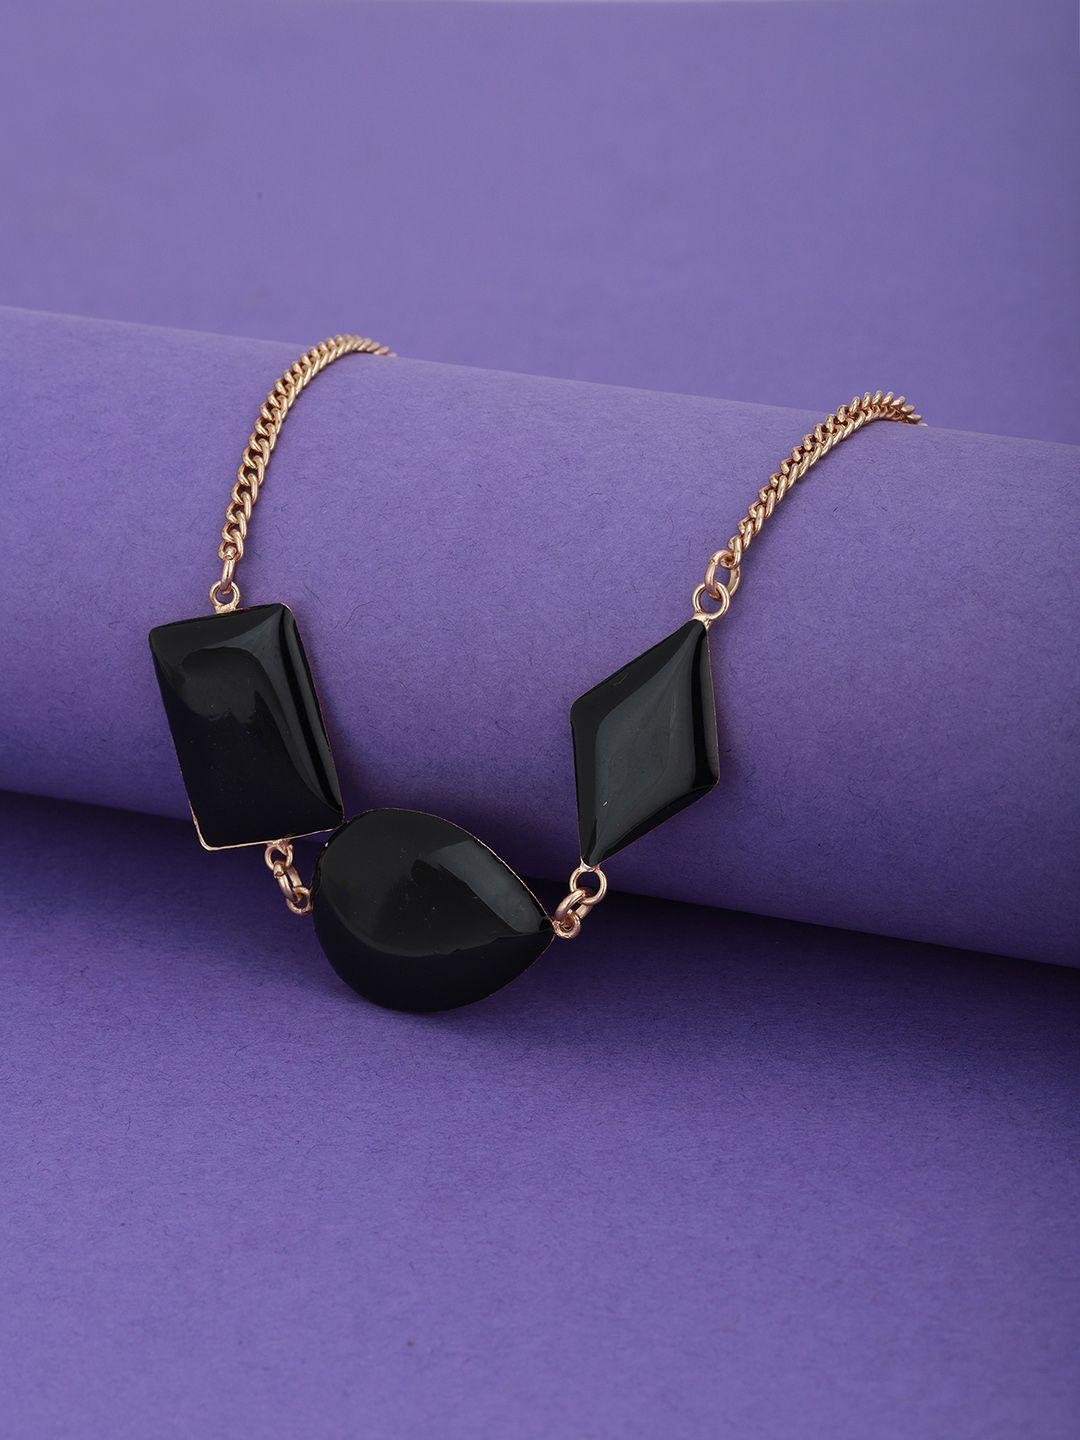 carlton-london-black-gold-plated-enamelled-necklace